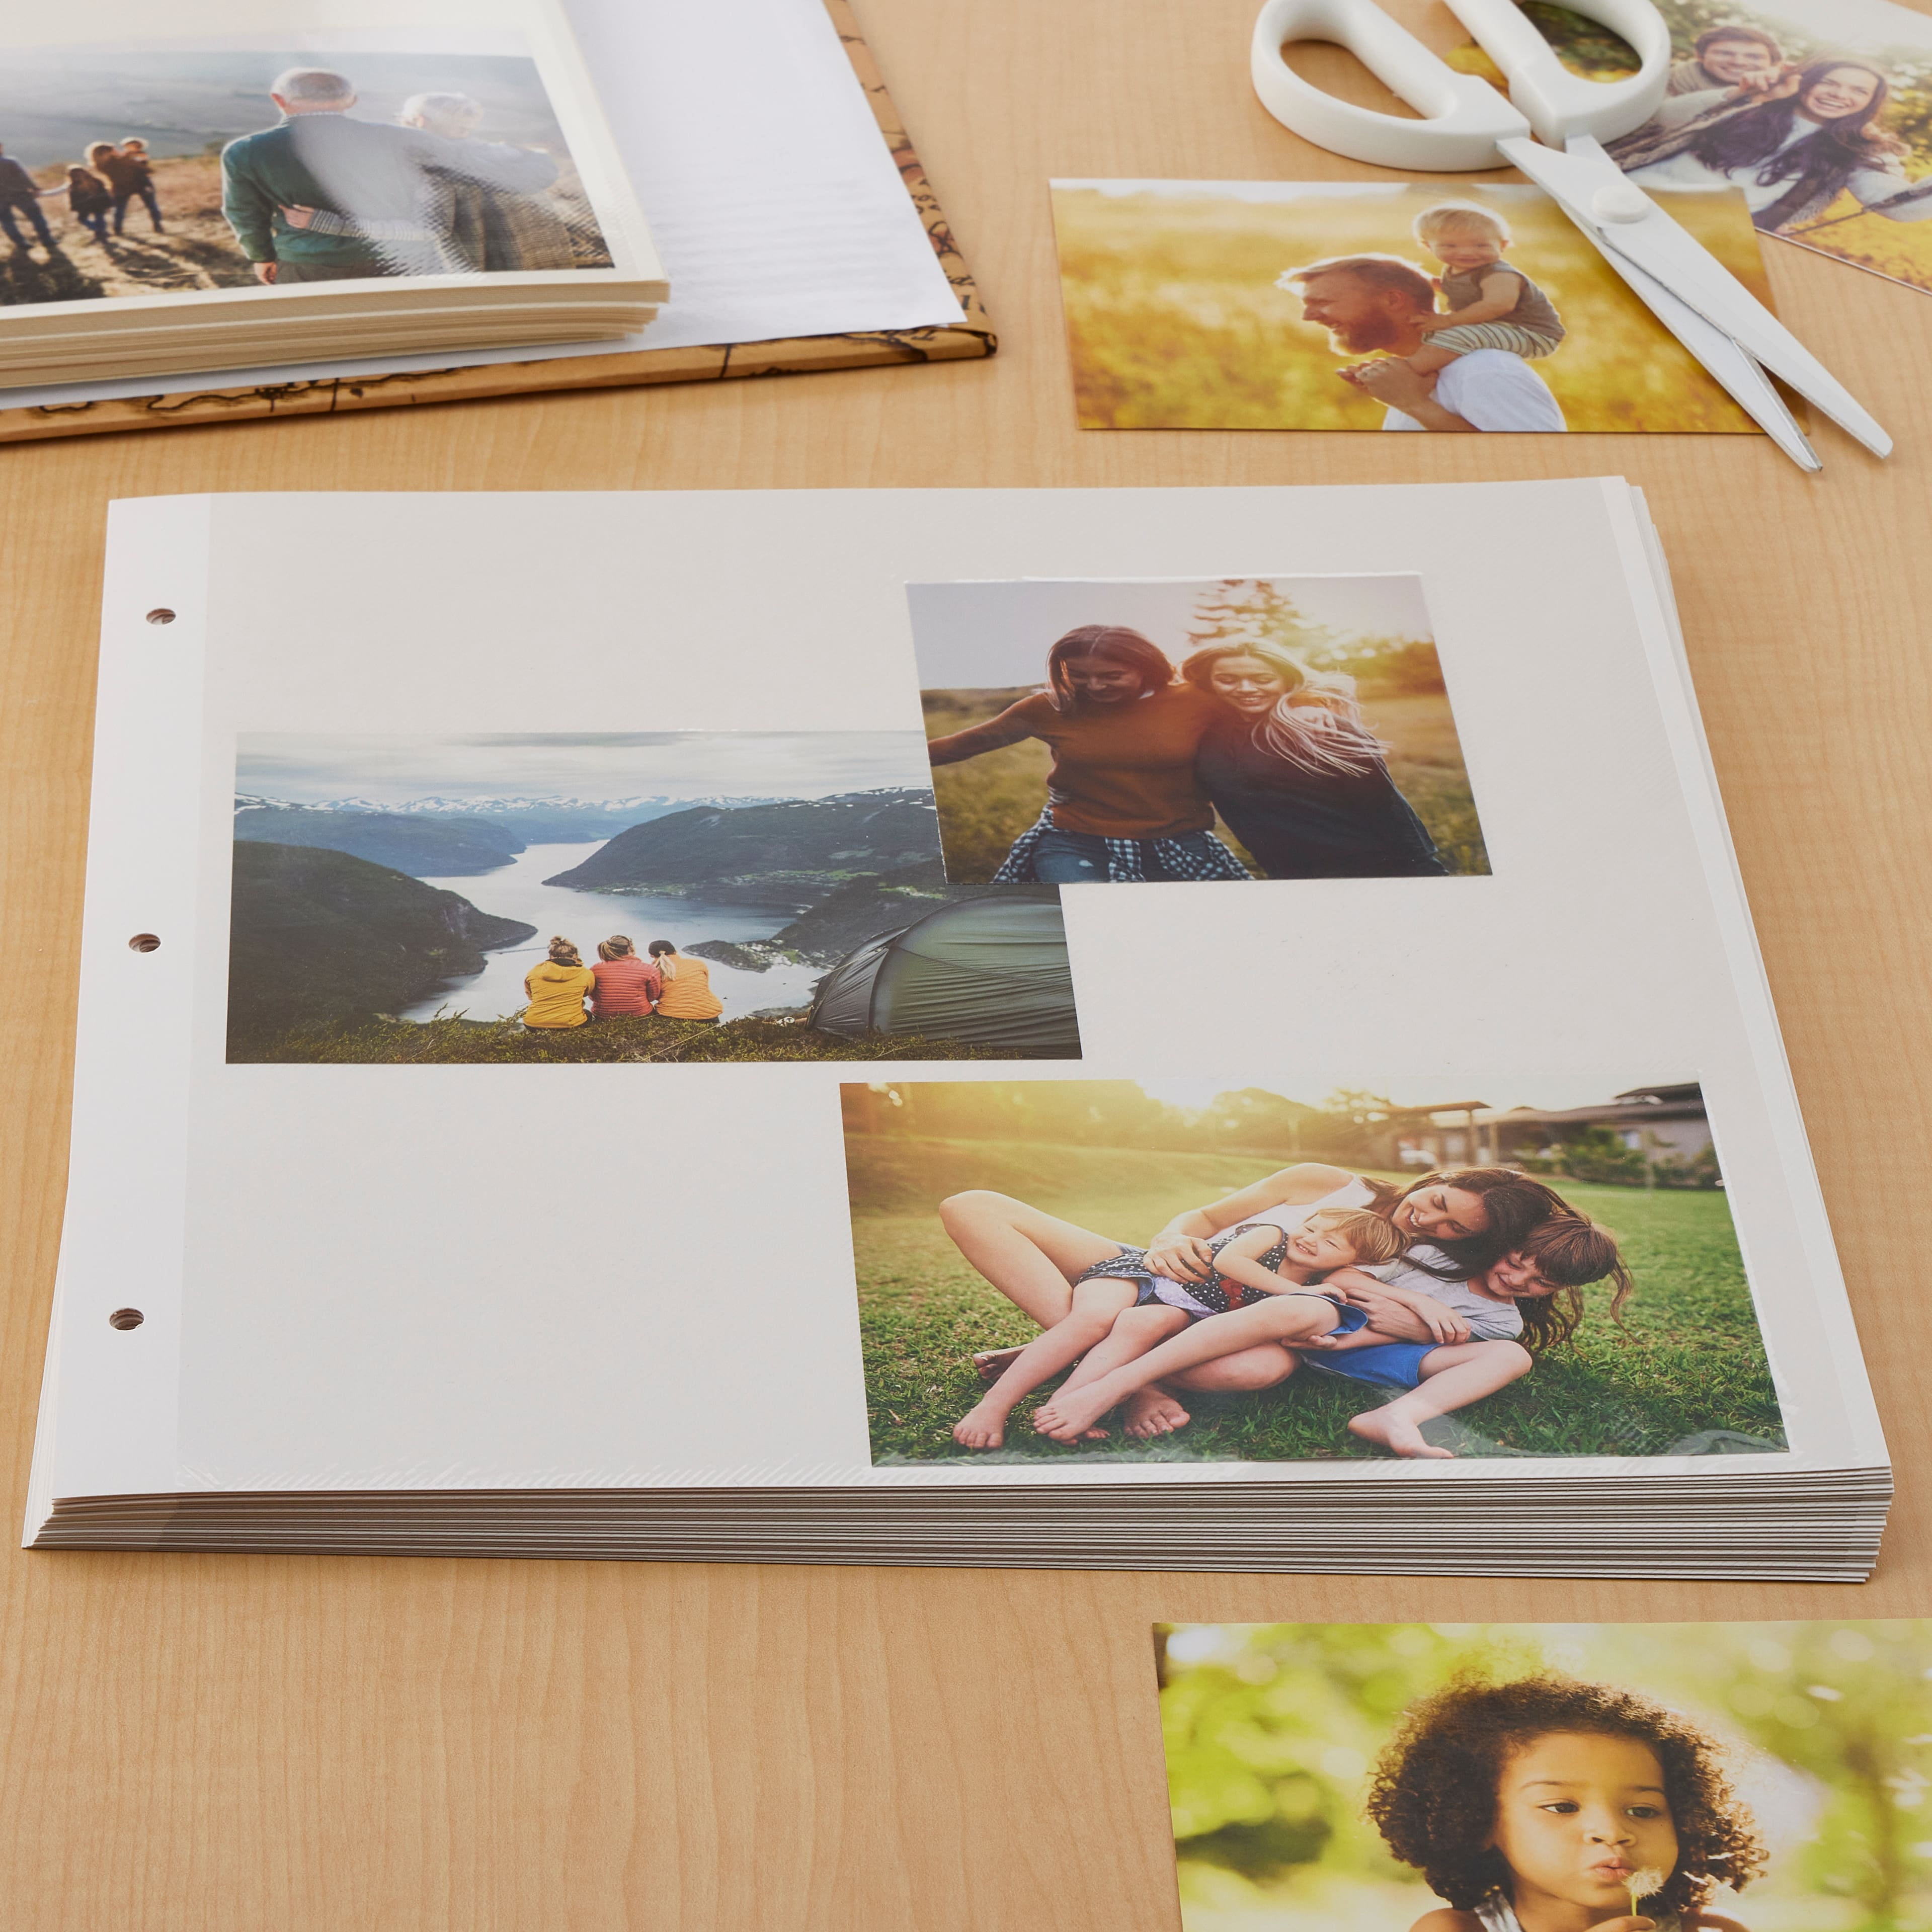 Removing Photos from Sticky Photo Albums